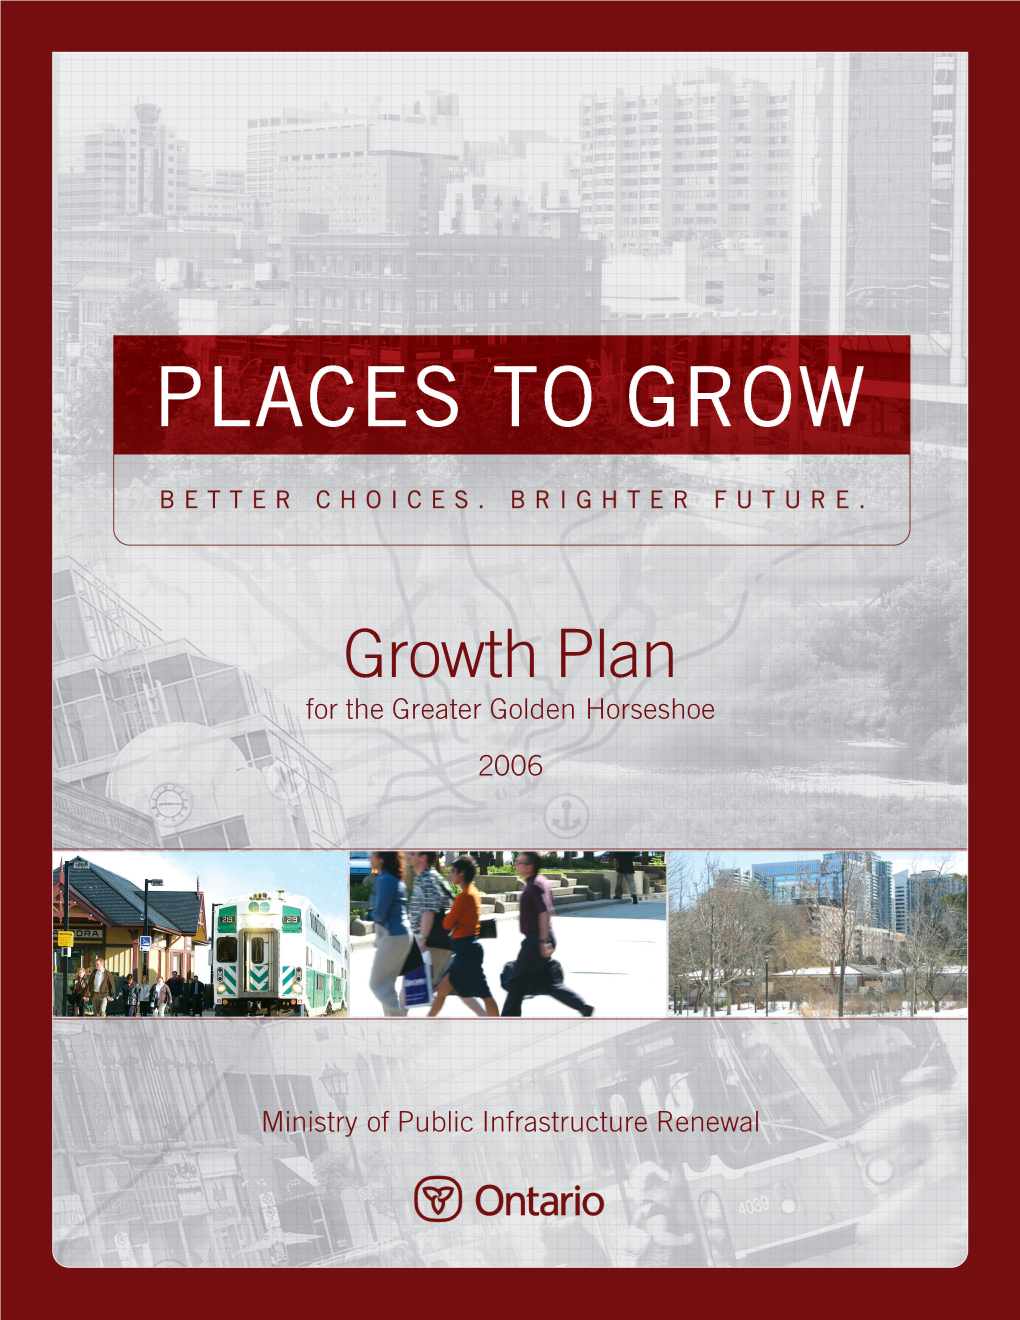 Growth Plan for the Greater Golden Horseshoe 2006